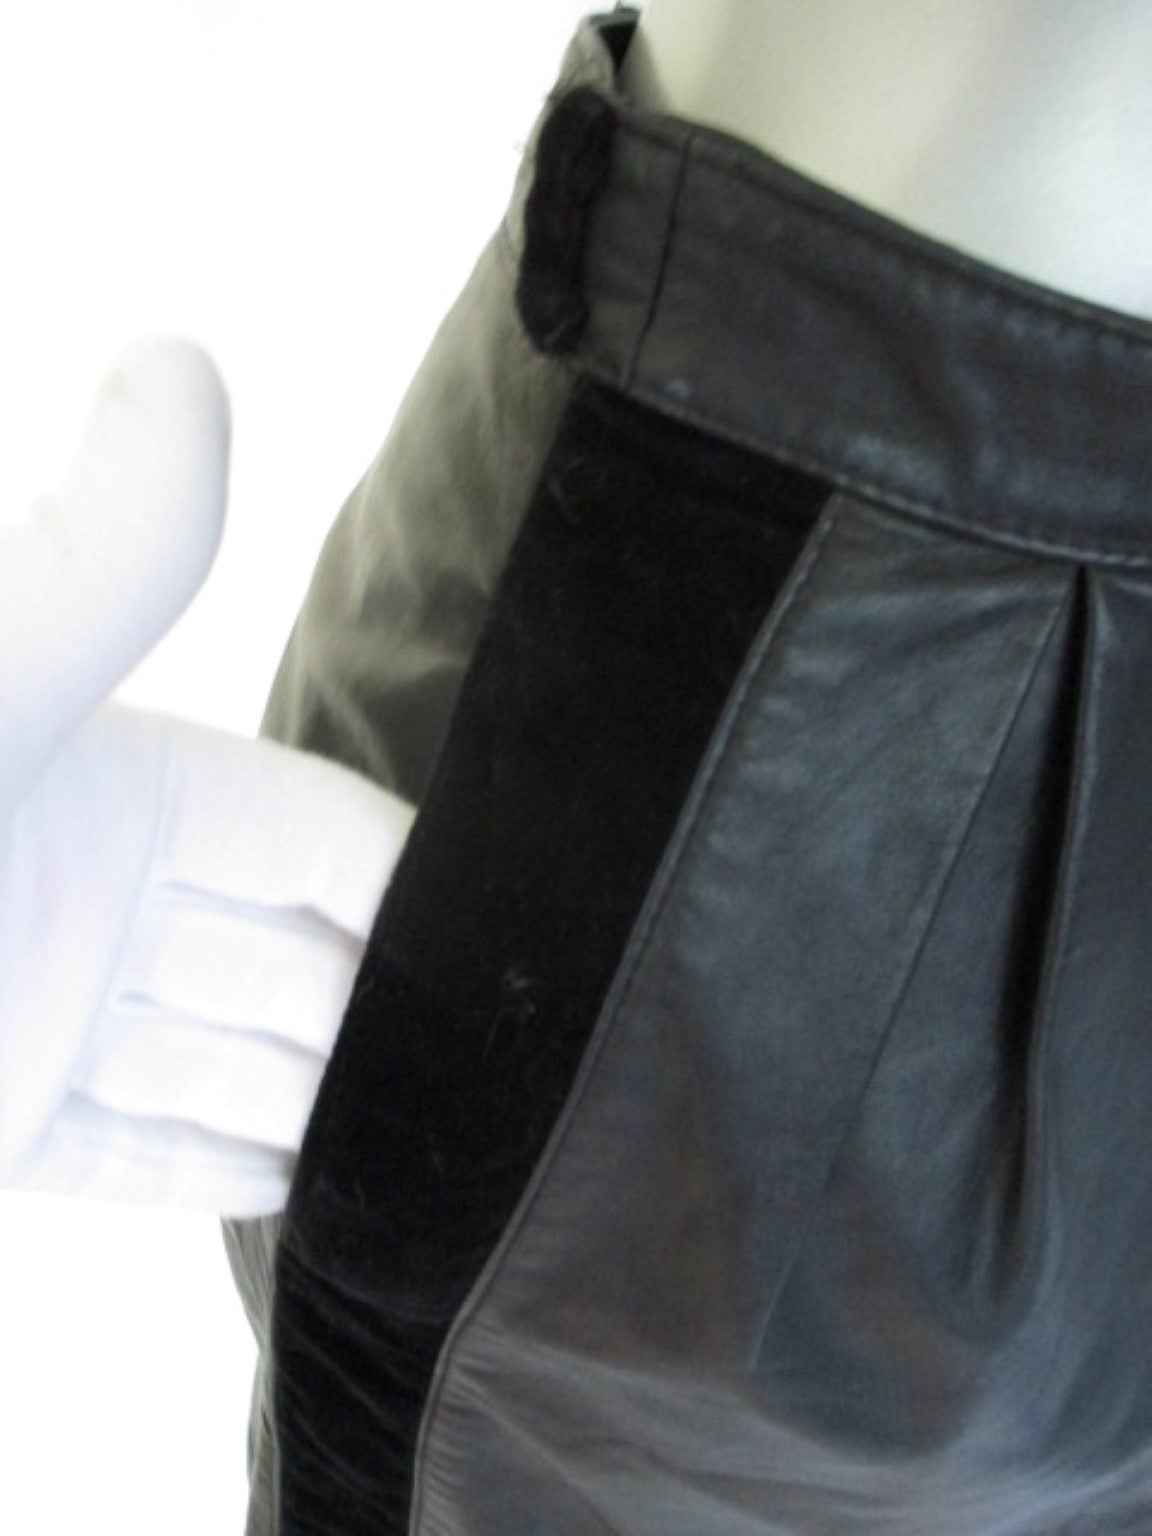 Valentino black leather skirt with a vertical velvet panel at 1 side and 2 side pockets.
size is Italian 42 appears to be smaller, please refer to the measurements in the description.
Please note that vintage items are not new and therefore might